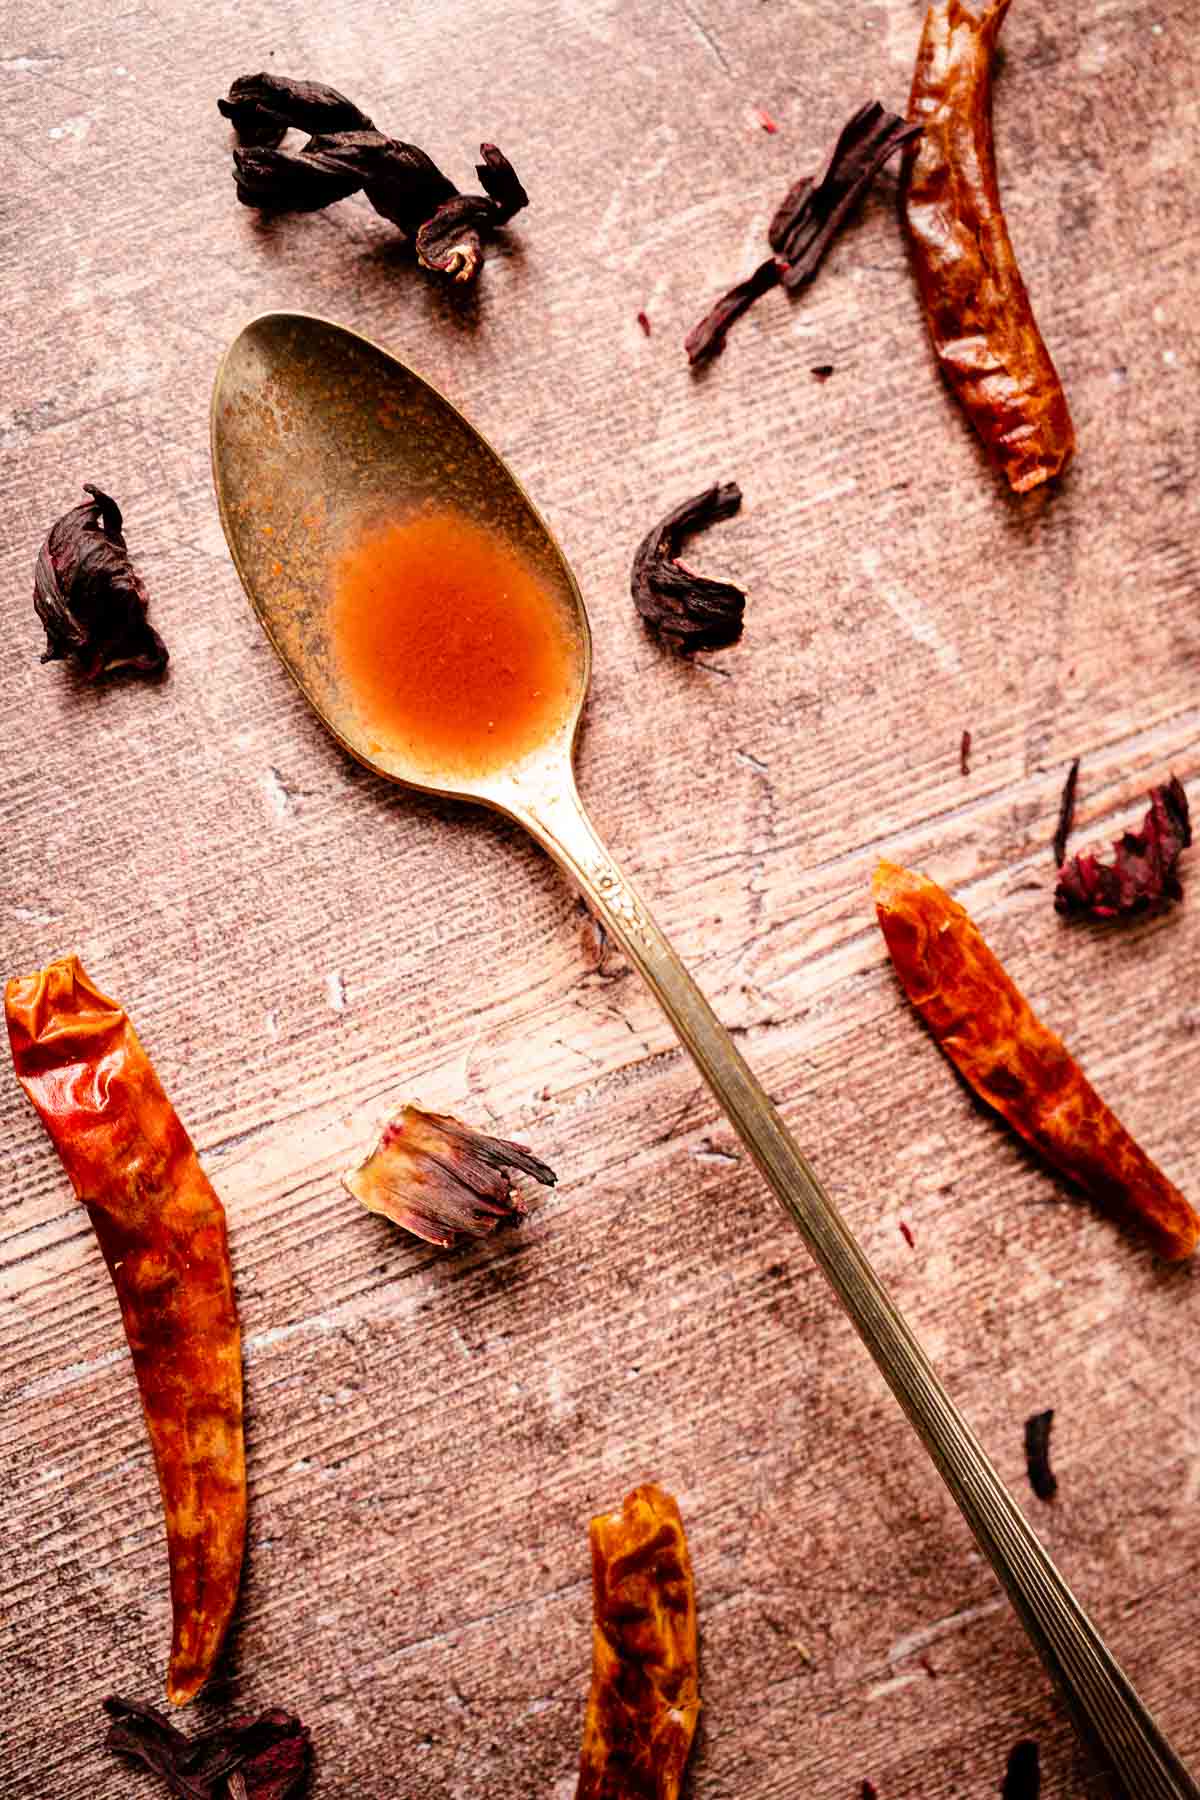 Close shot of a tarnished silver spoon filled with orange red hot sauce resting on a wooden backdrop.